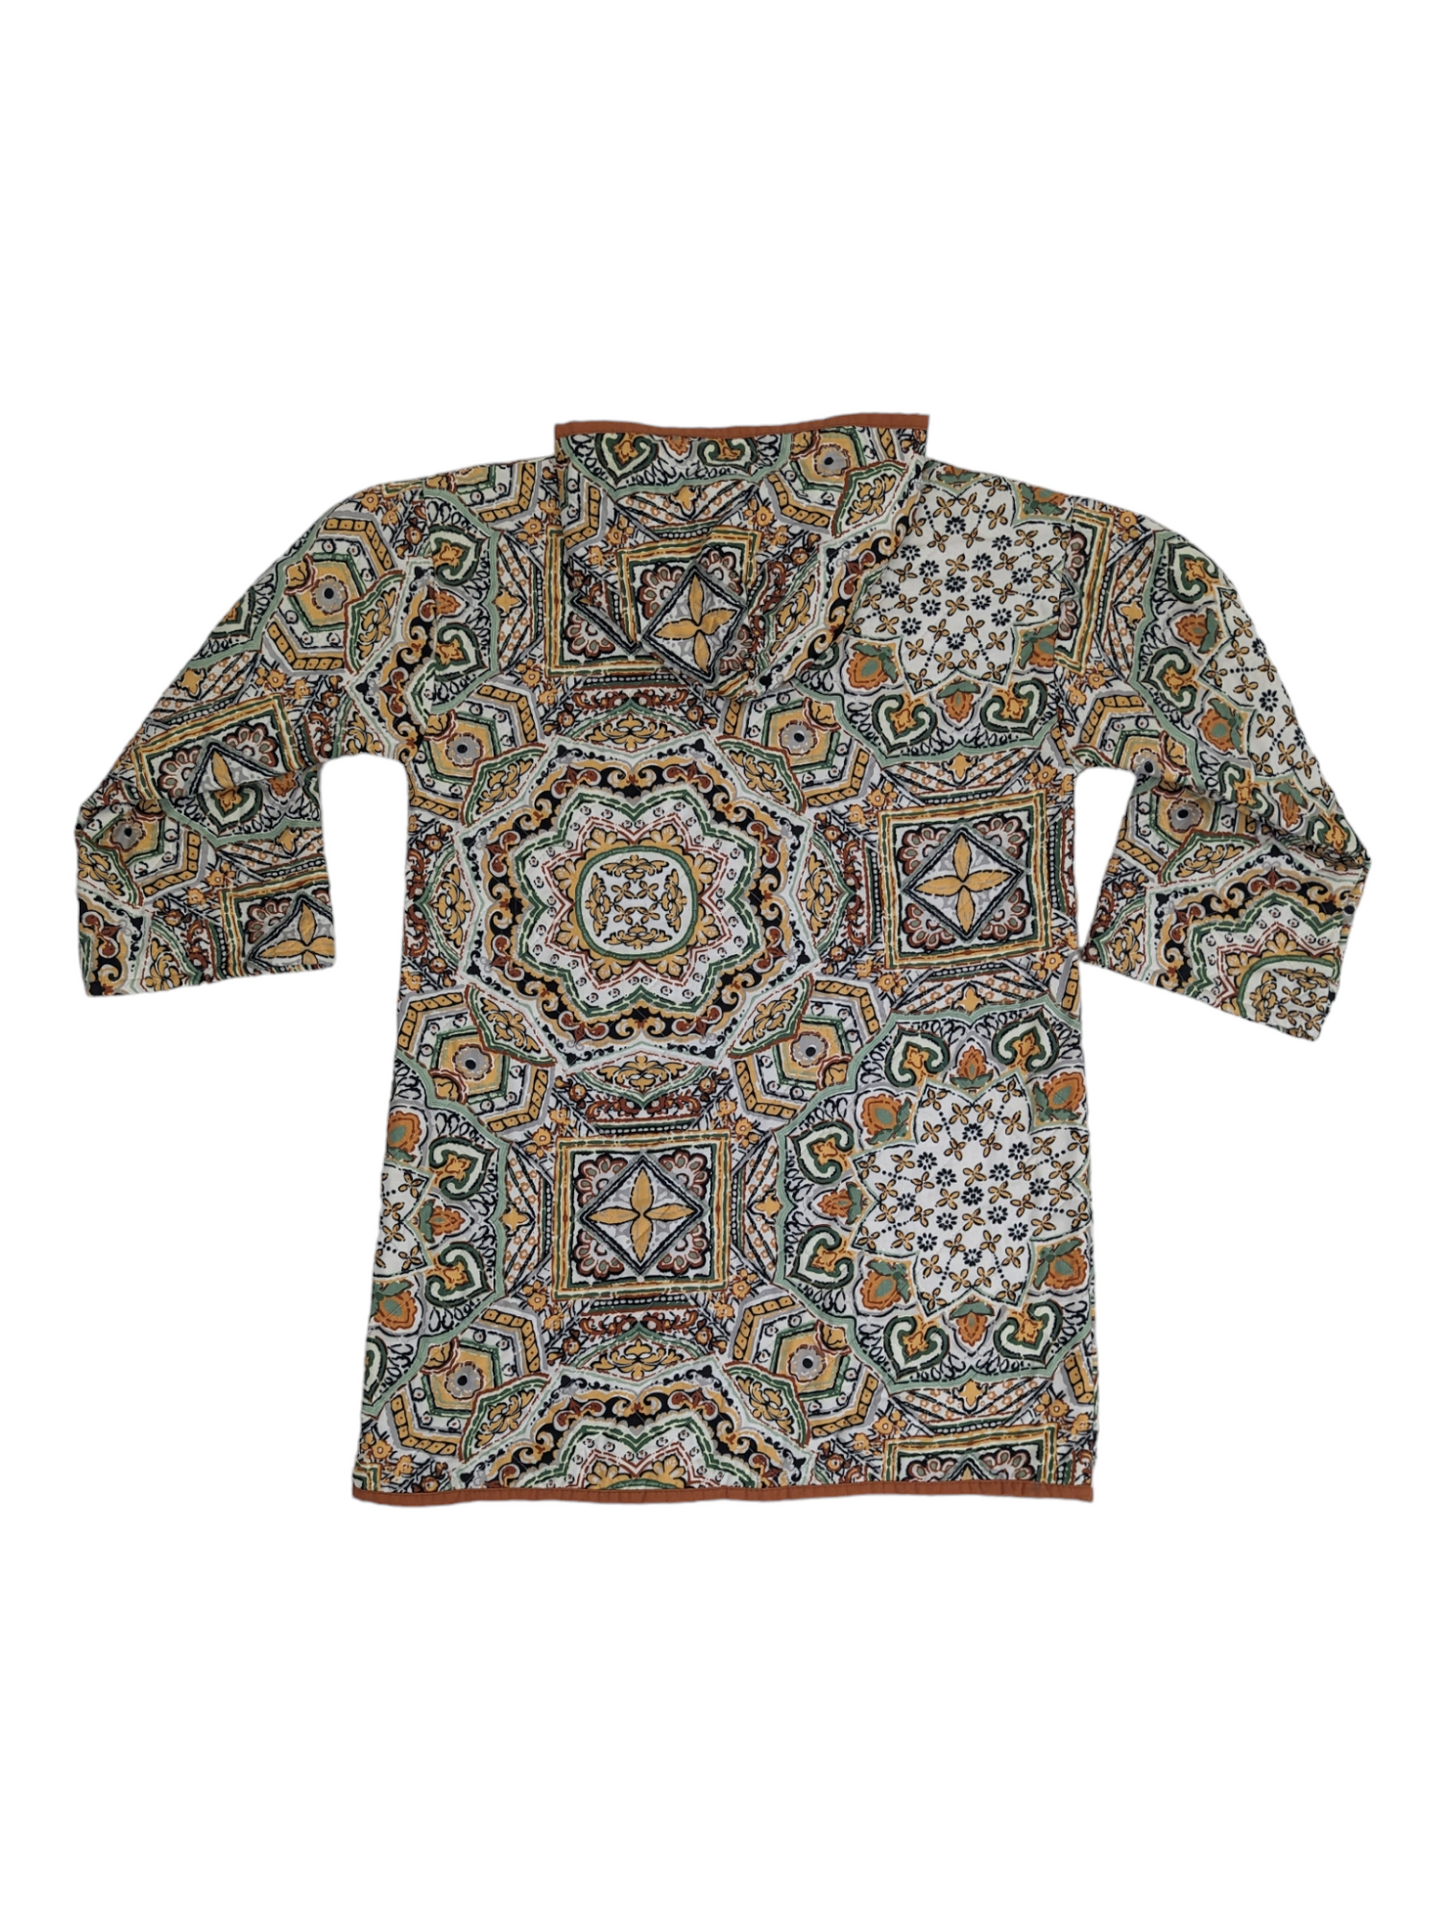 Top rear view of psychedelic paisley quilt hoodie.